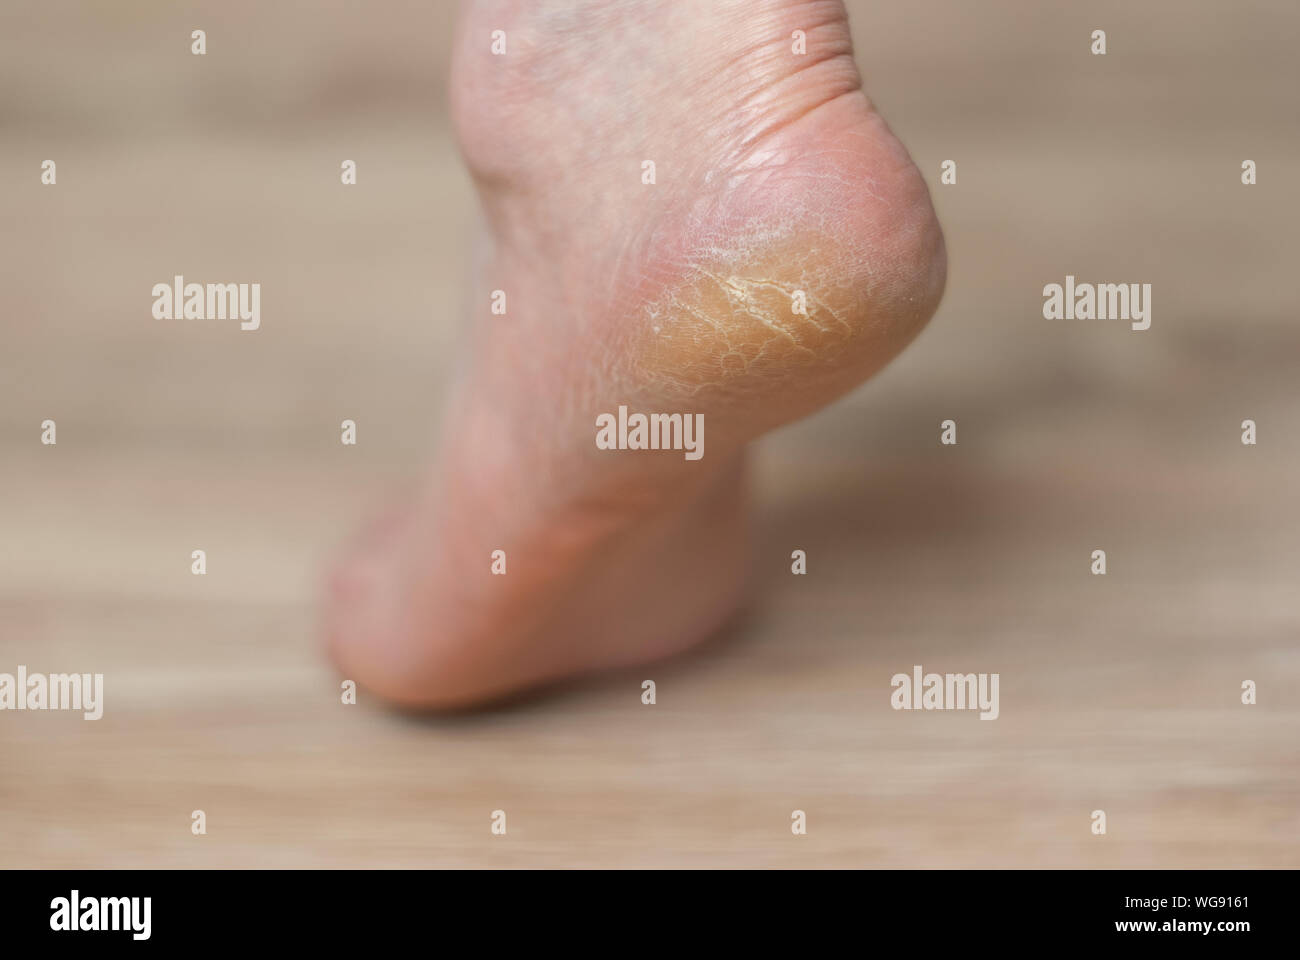 clavus and cracks on the heel of female foot close-up Stock Photo